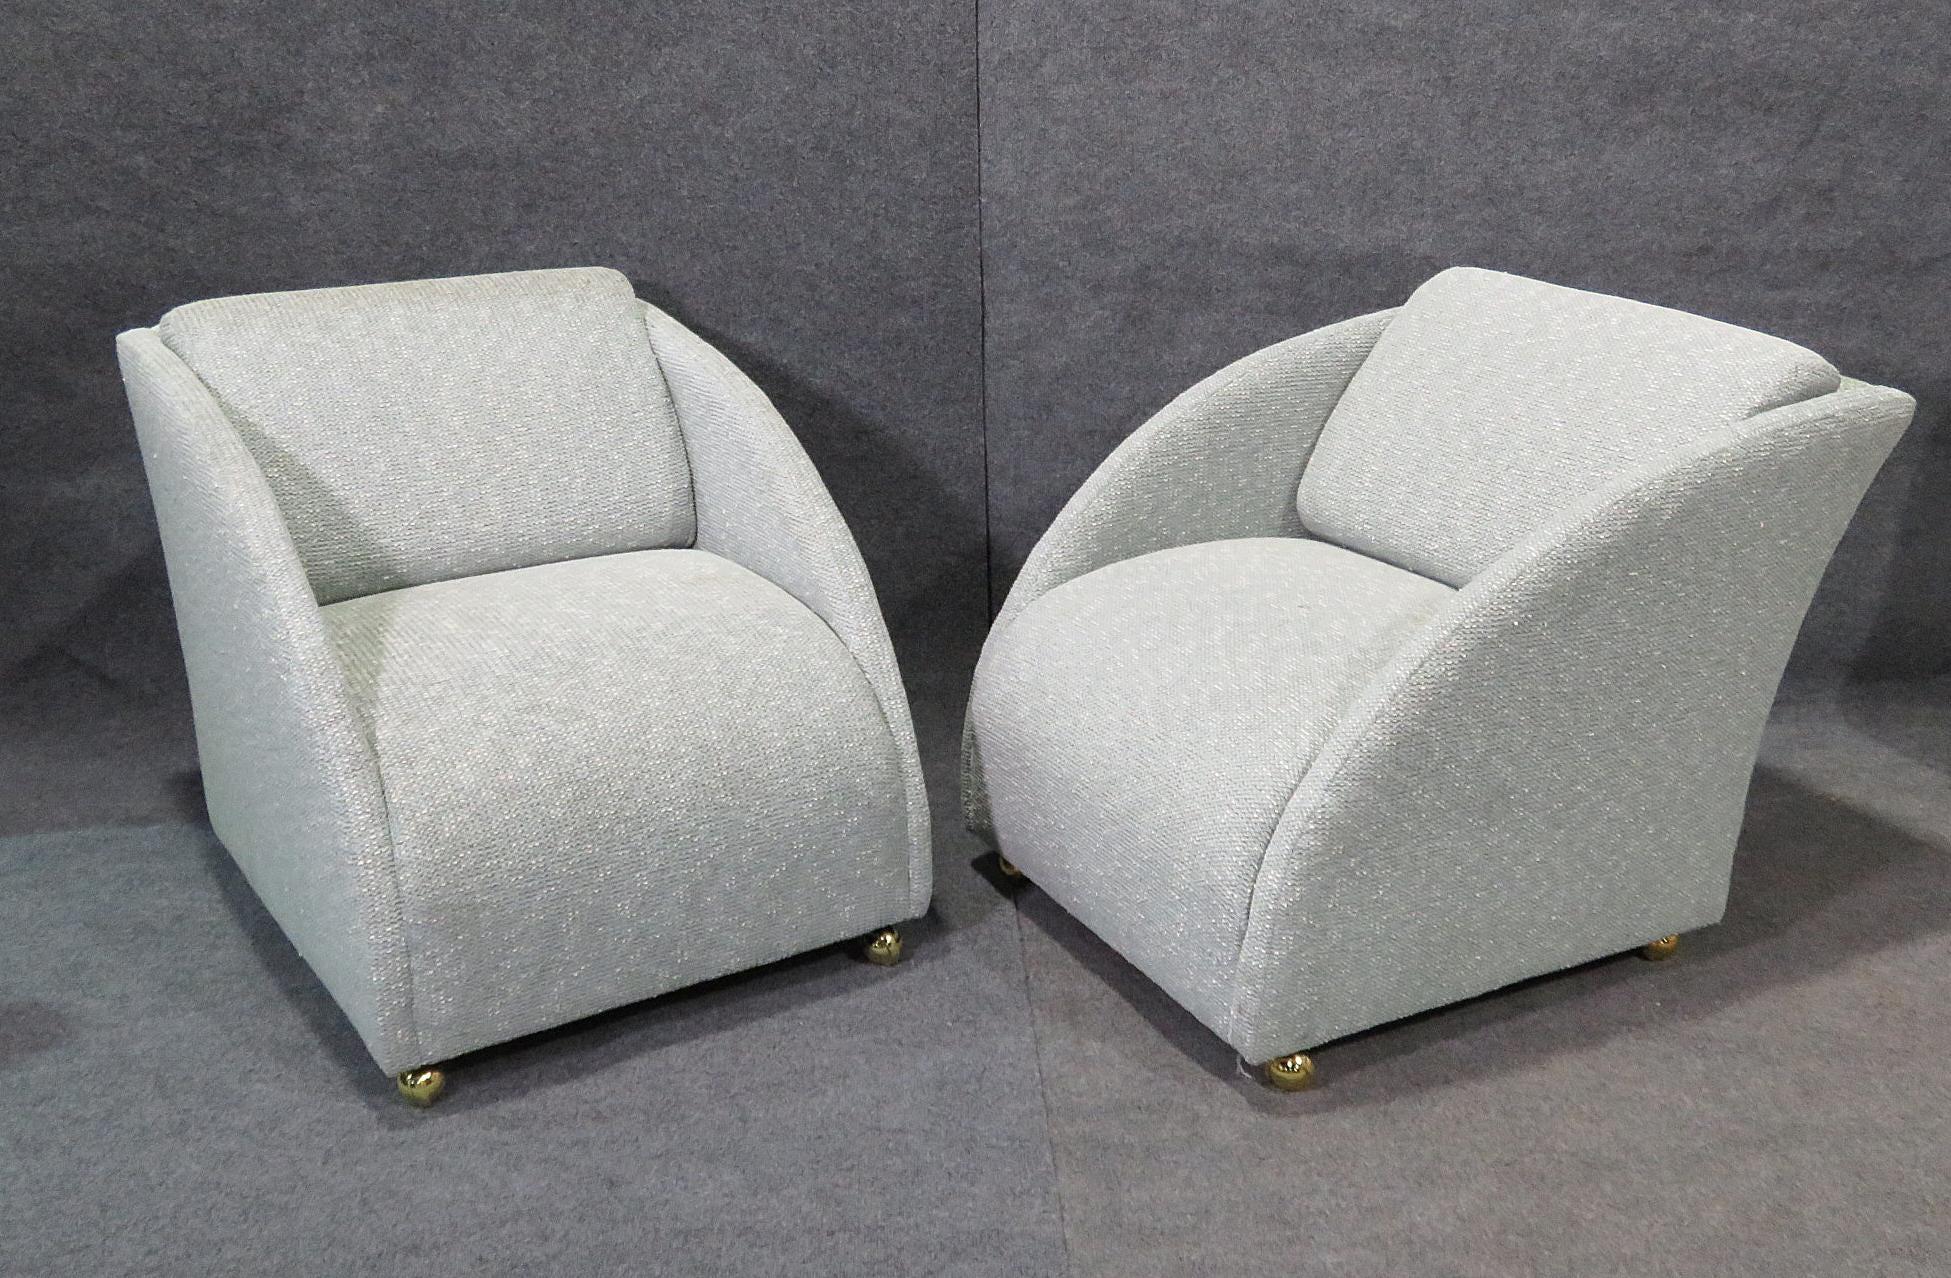 20th Century Pair of Mid-Century Modern Chairs and Ottoman